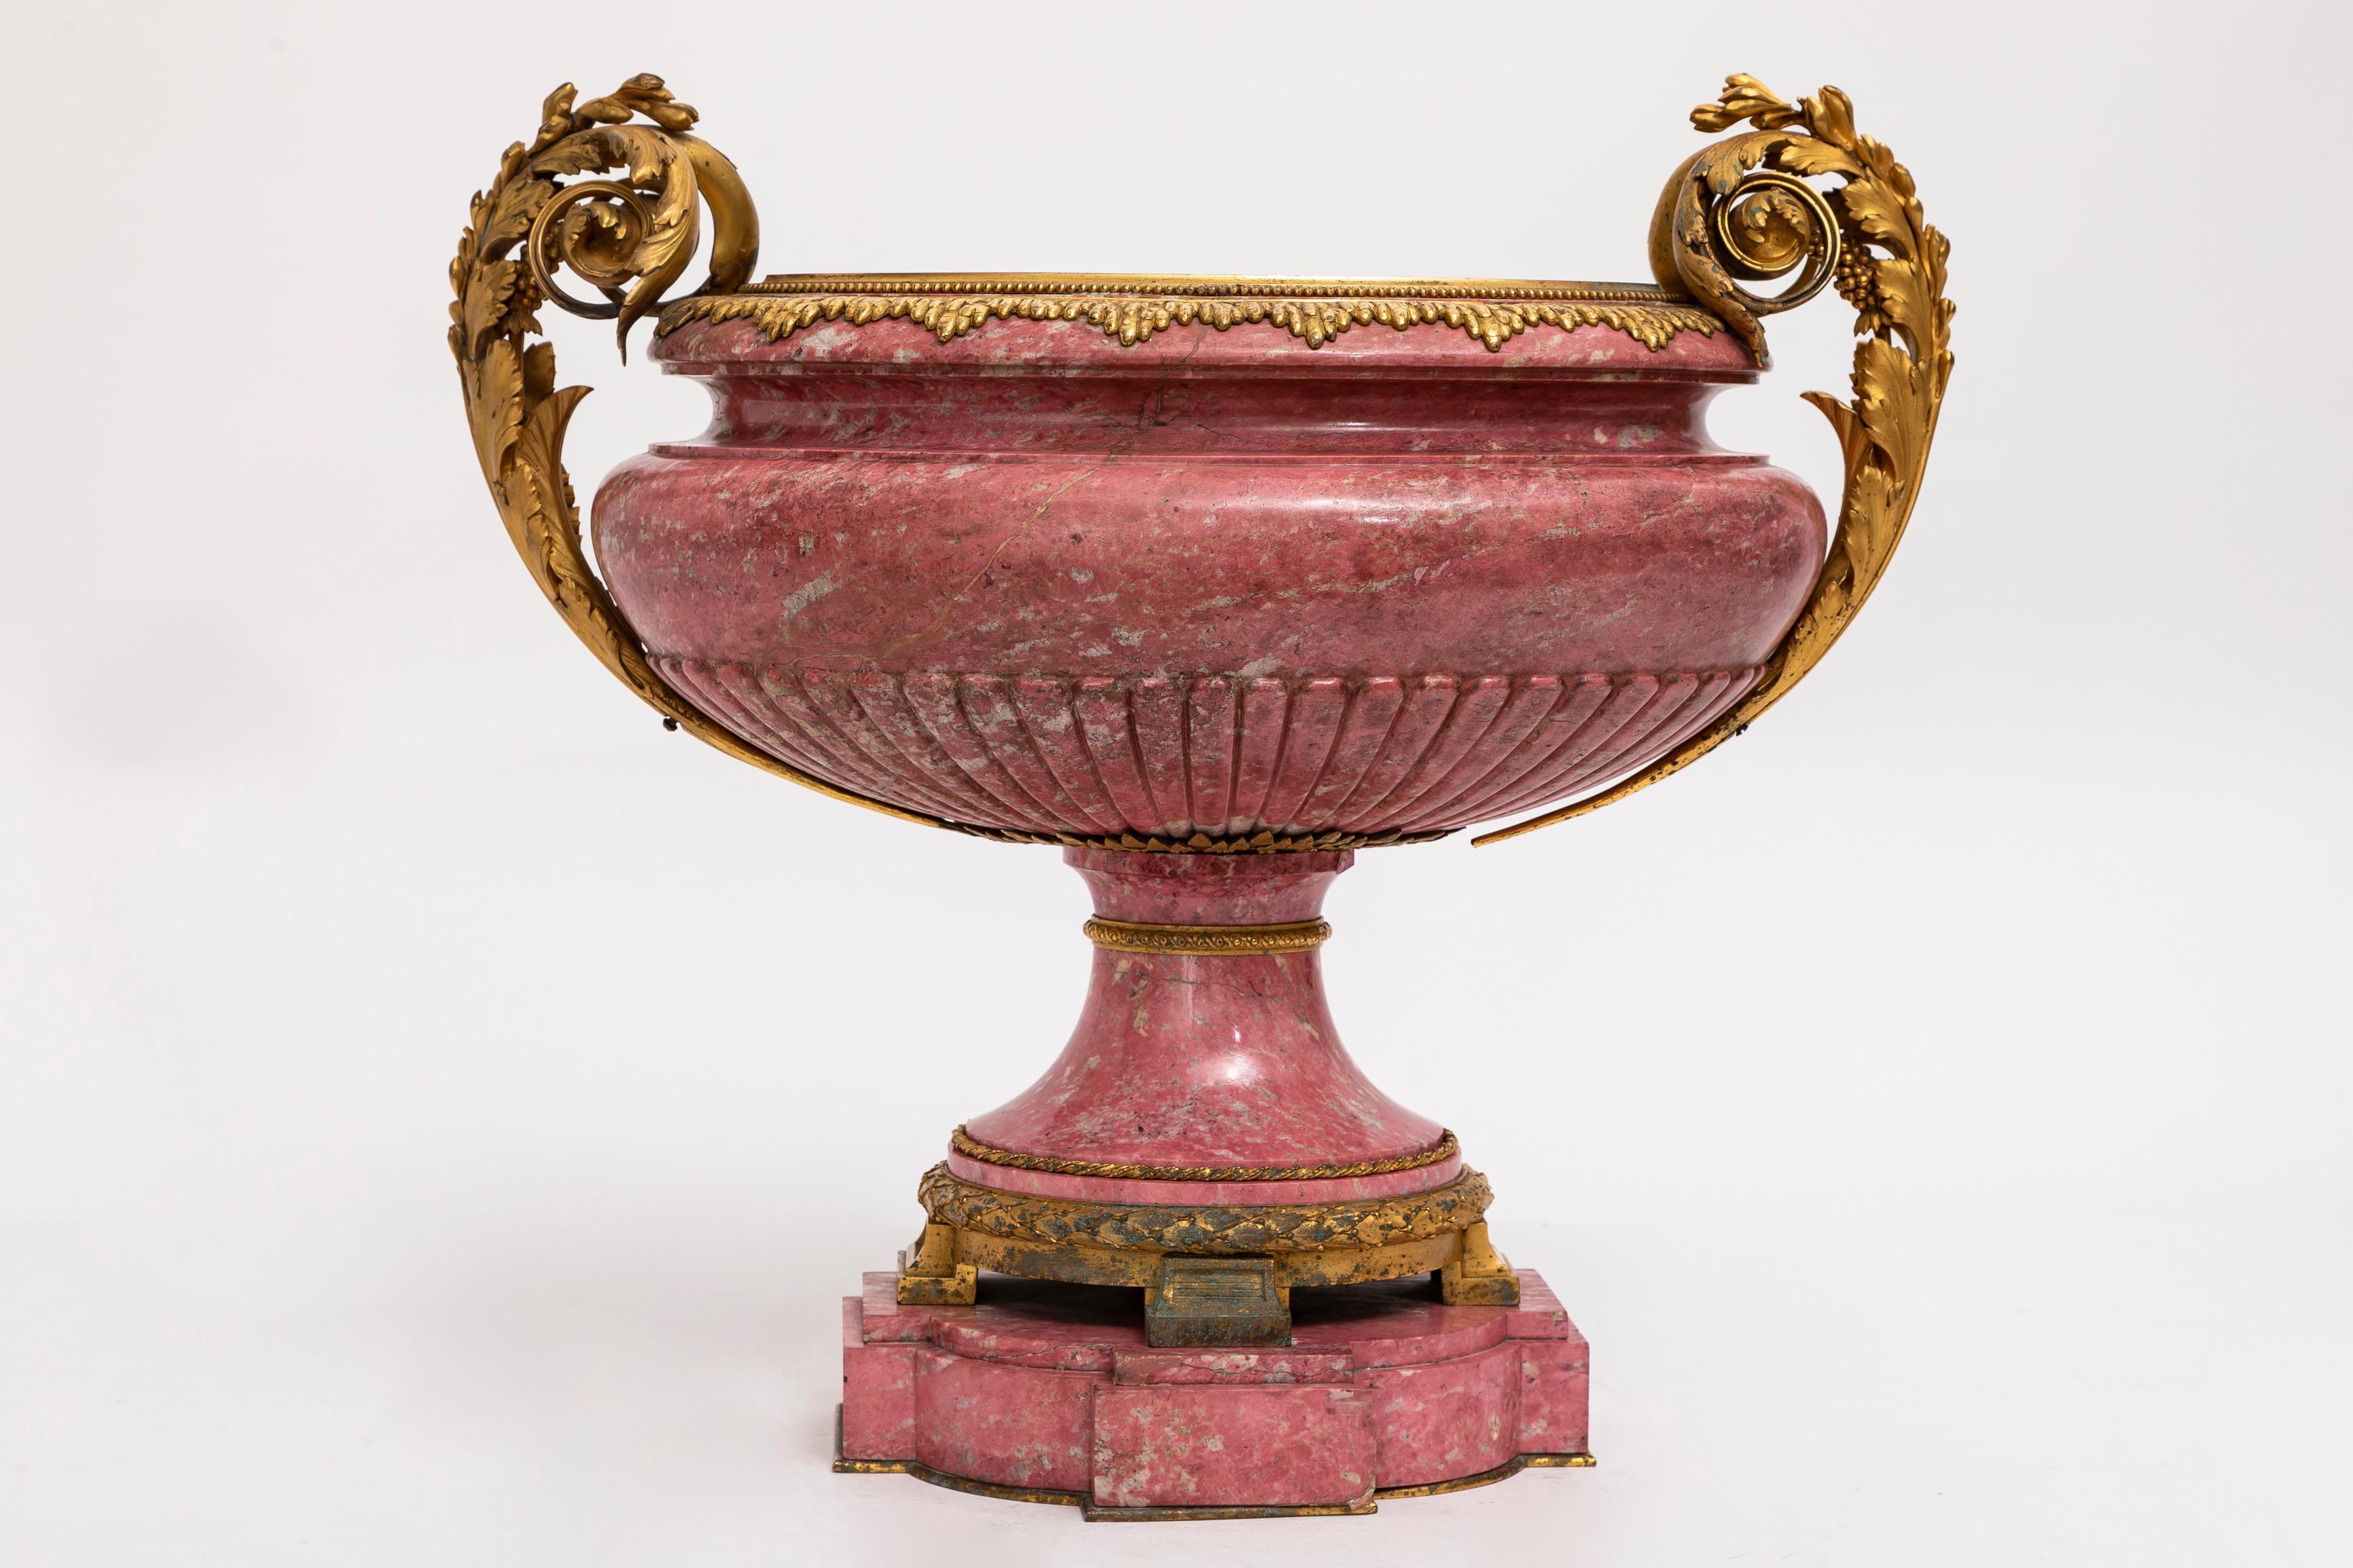 Louis XVI A 19th C. Russian Ormolu-Mounted Hand-Carved Pink Rhodonite Tazza/Centerpiece For Sale